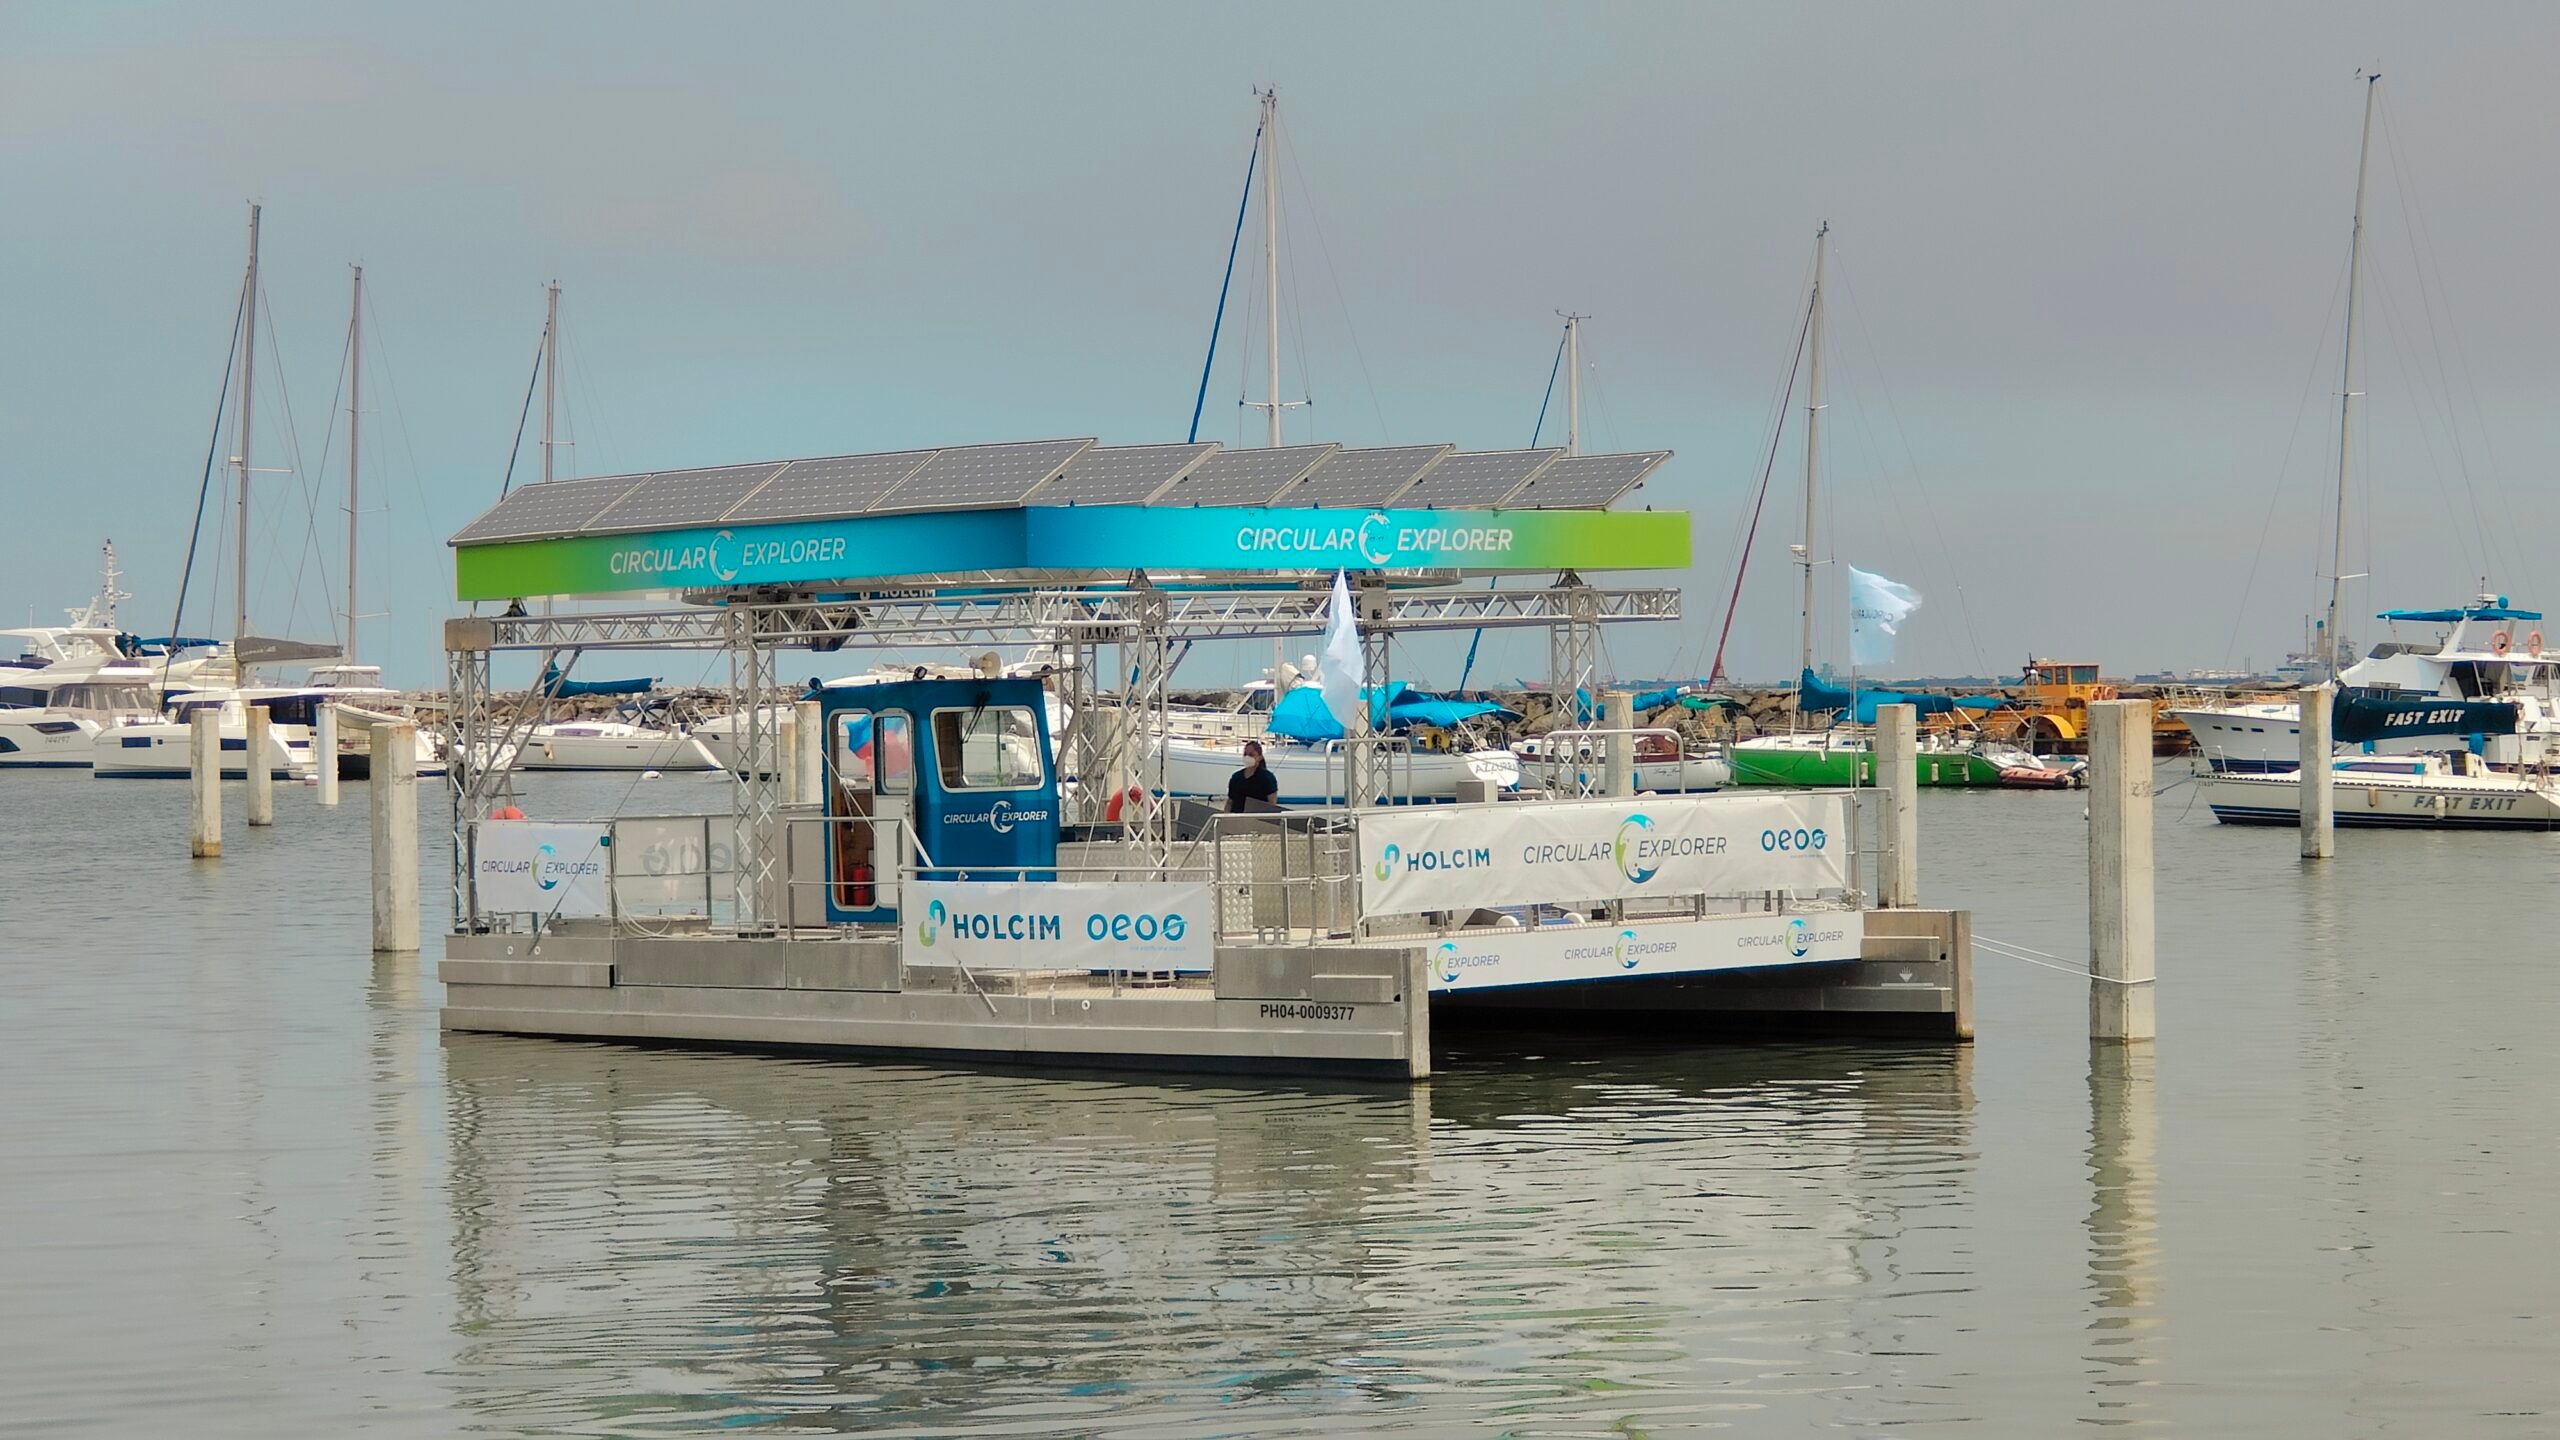 Solar-powered recycling vessel Circular Explorer arrives in the Philippines